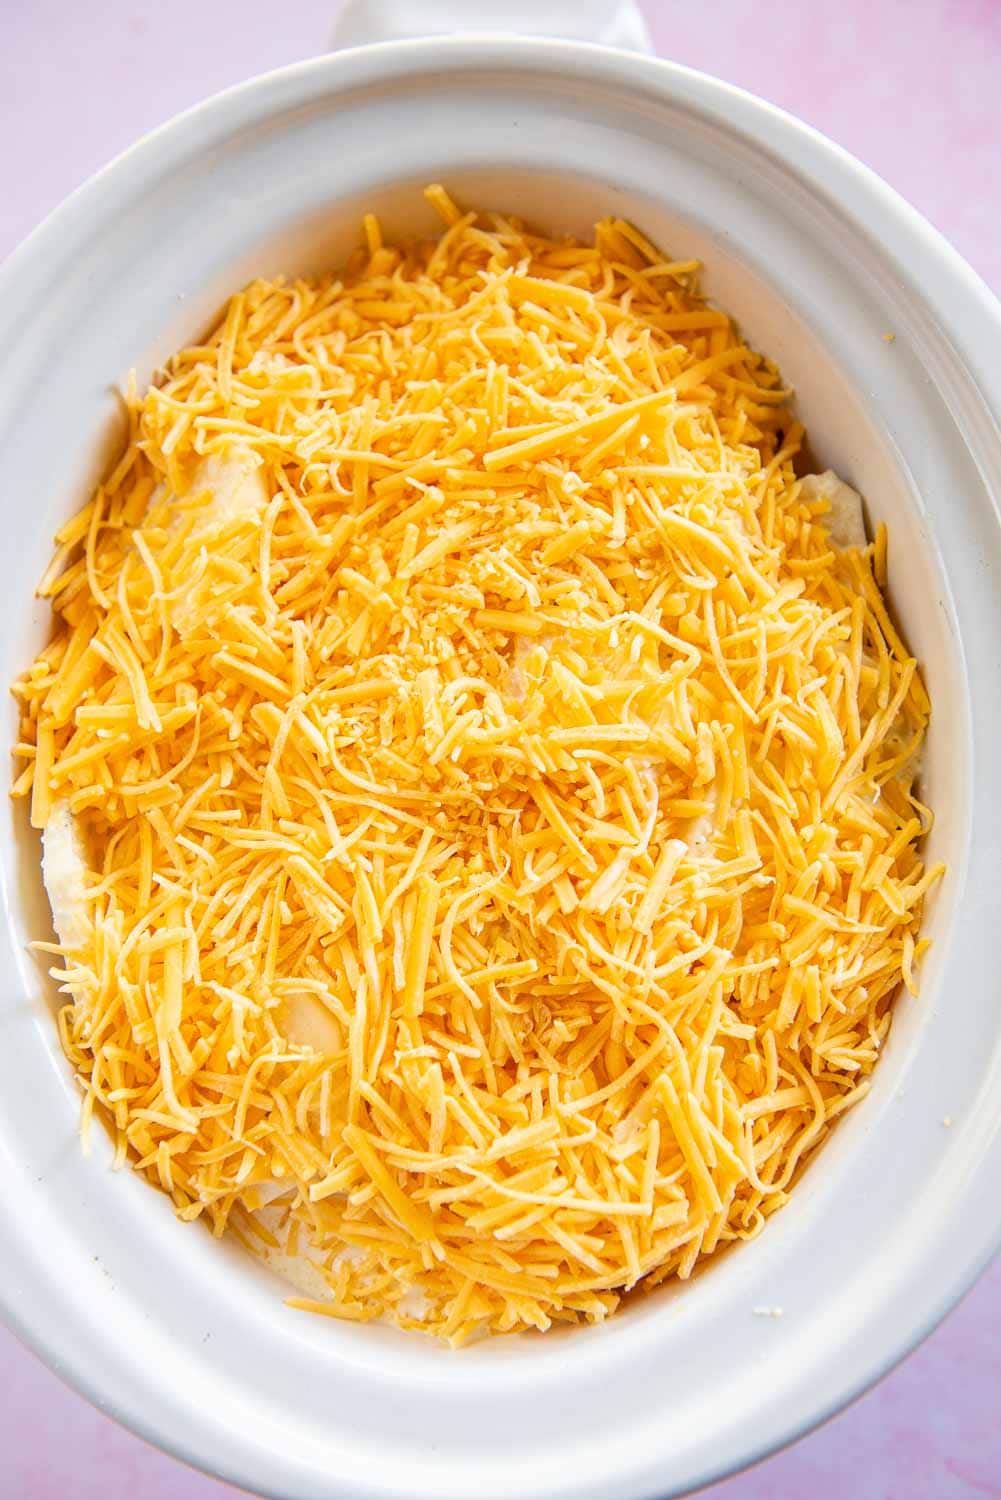 Slow cooker white bowl with potato mixture cheese thoroughly spread on top